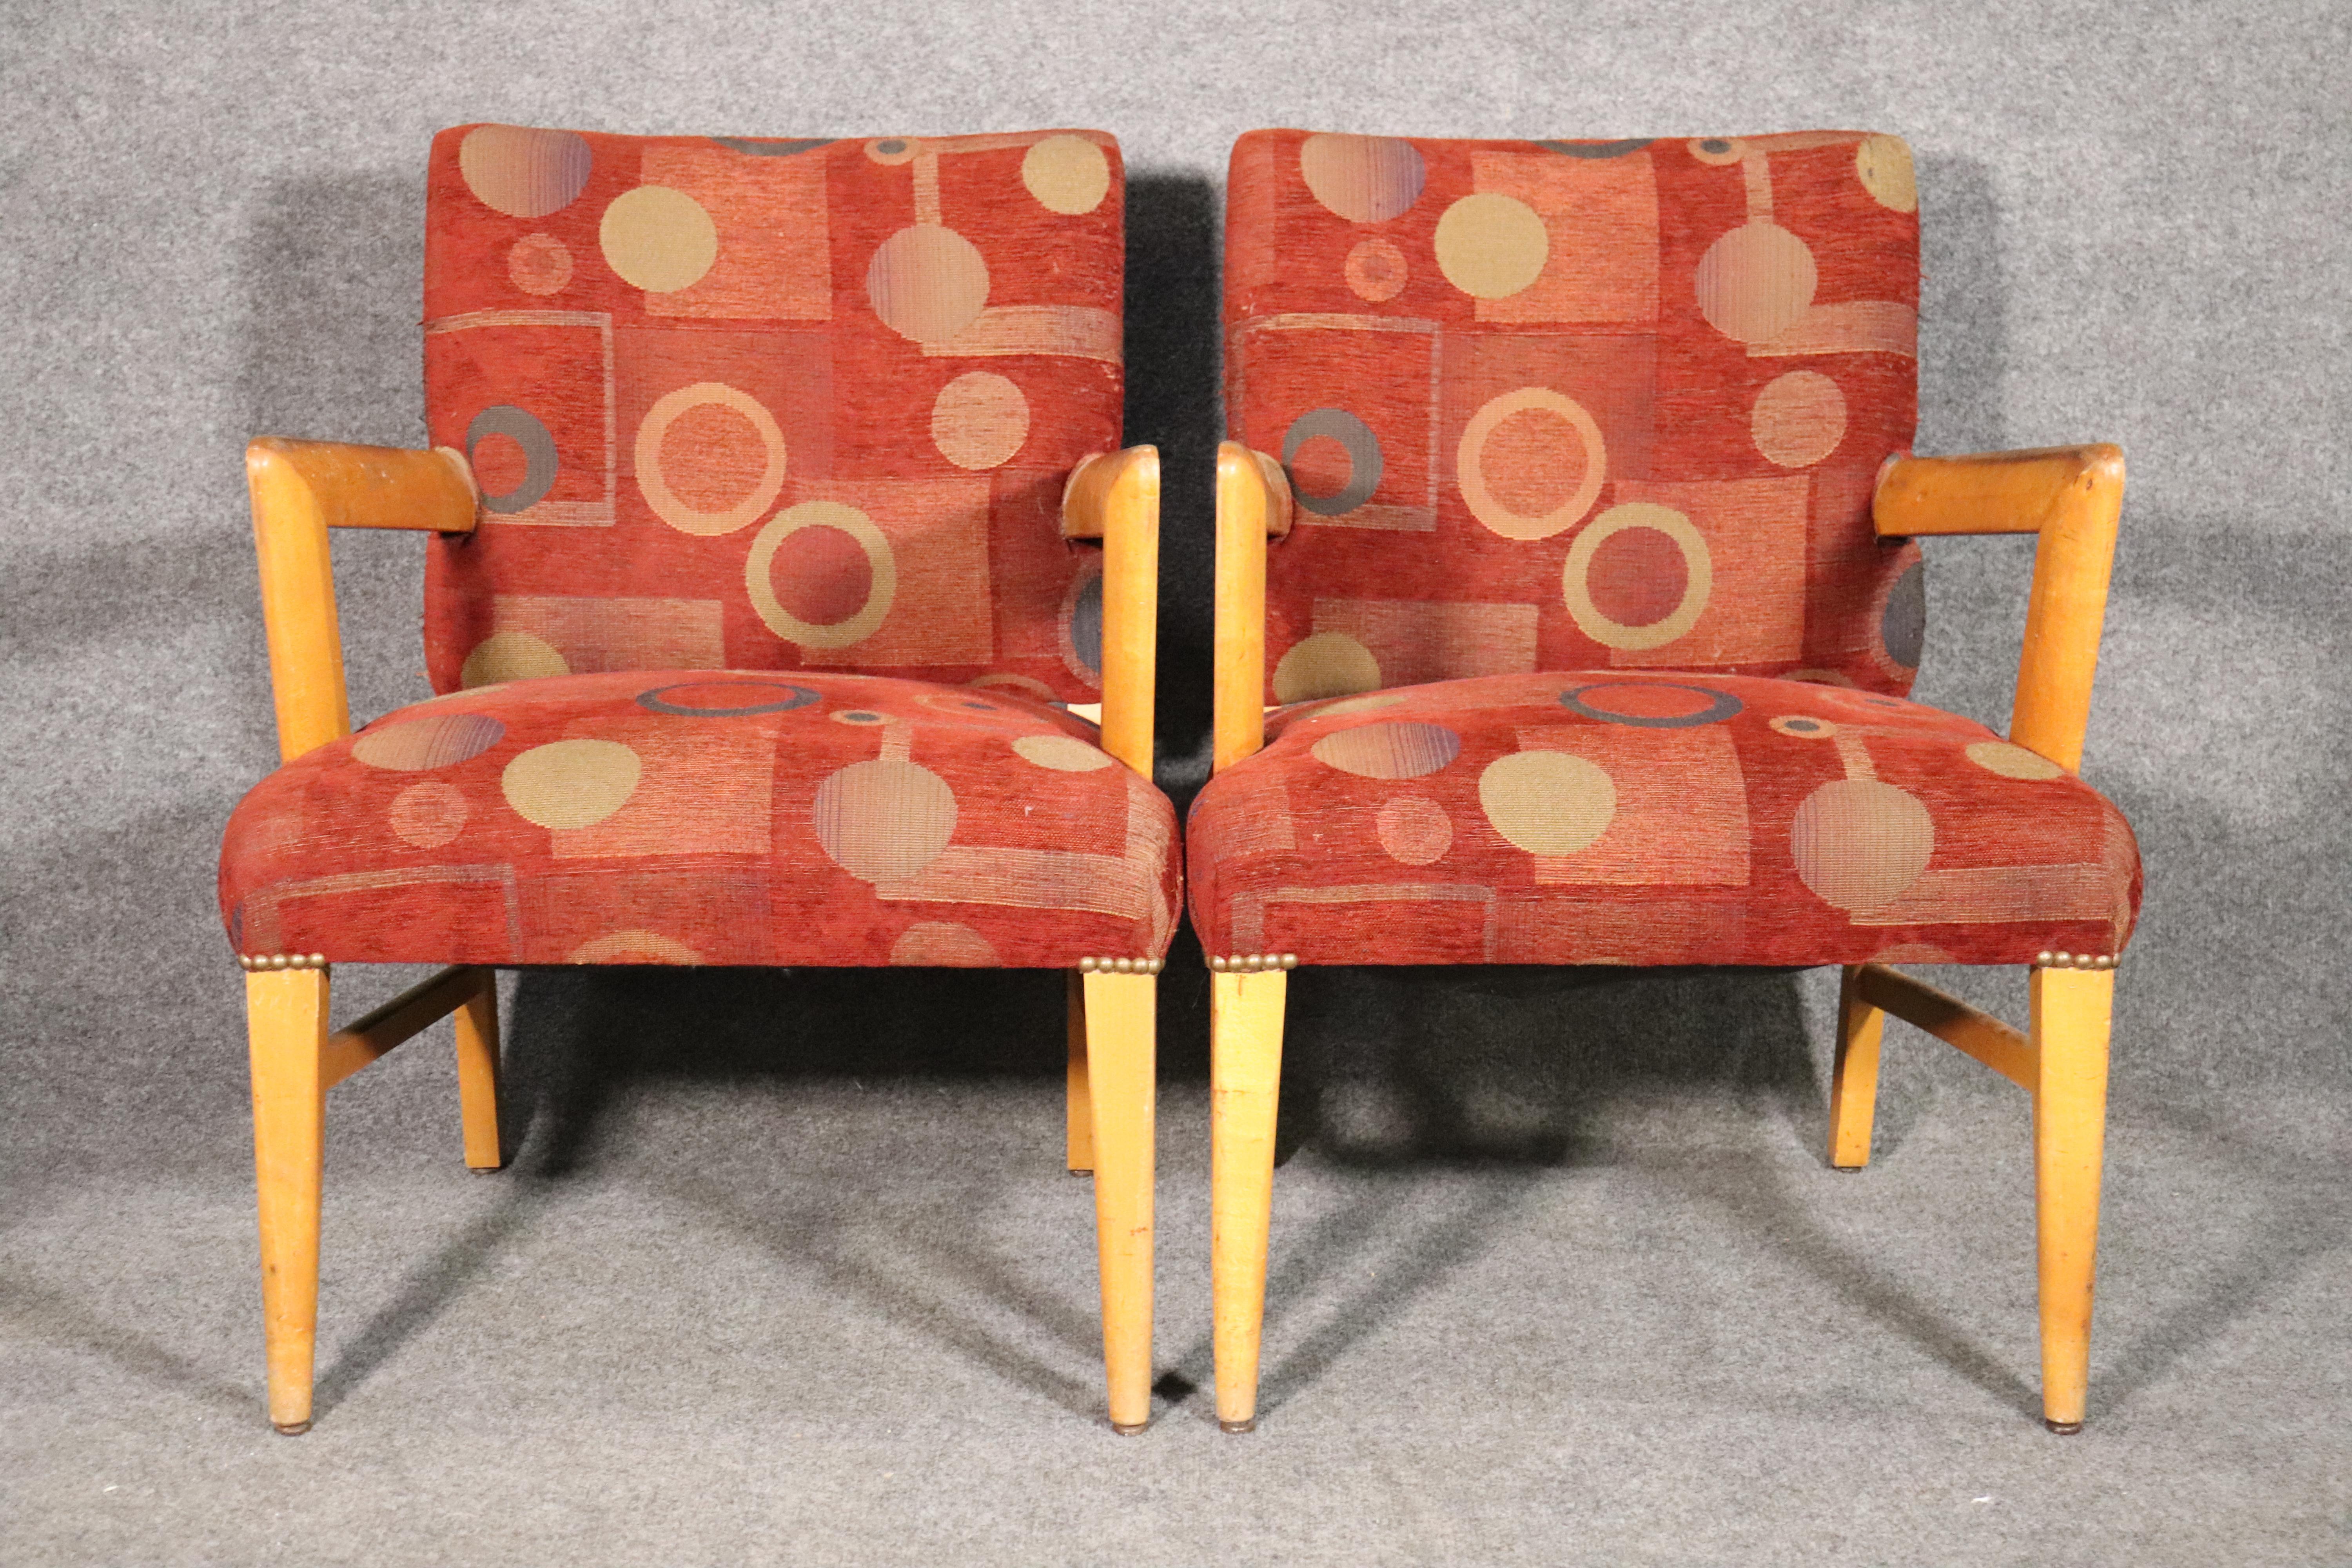 Pair of maple armchairs with sharp deco style lines.
Please confirm location